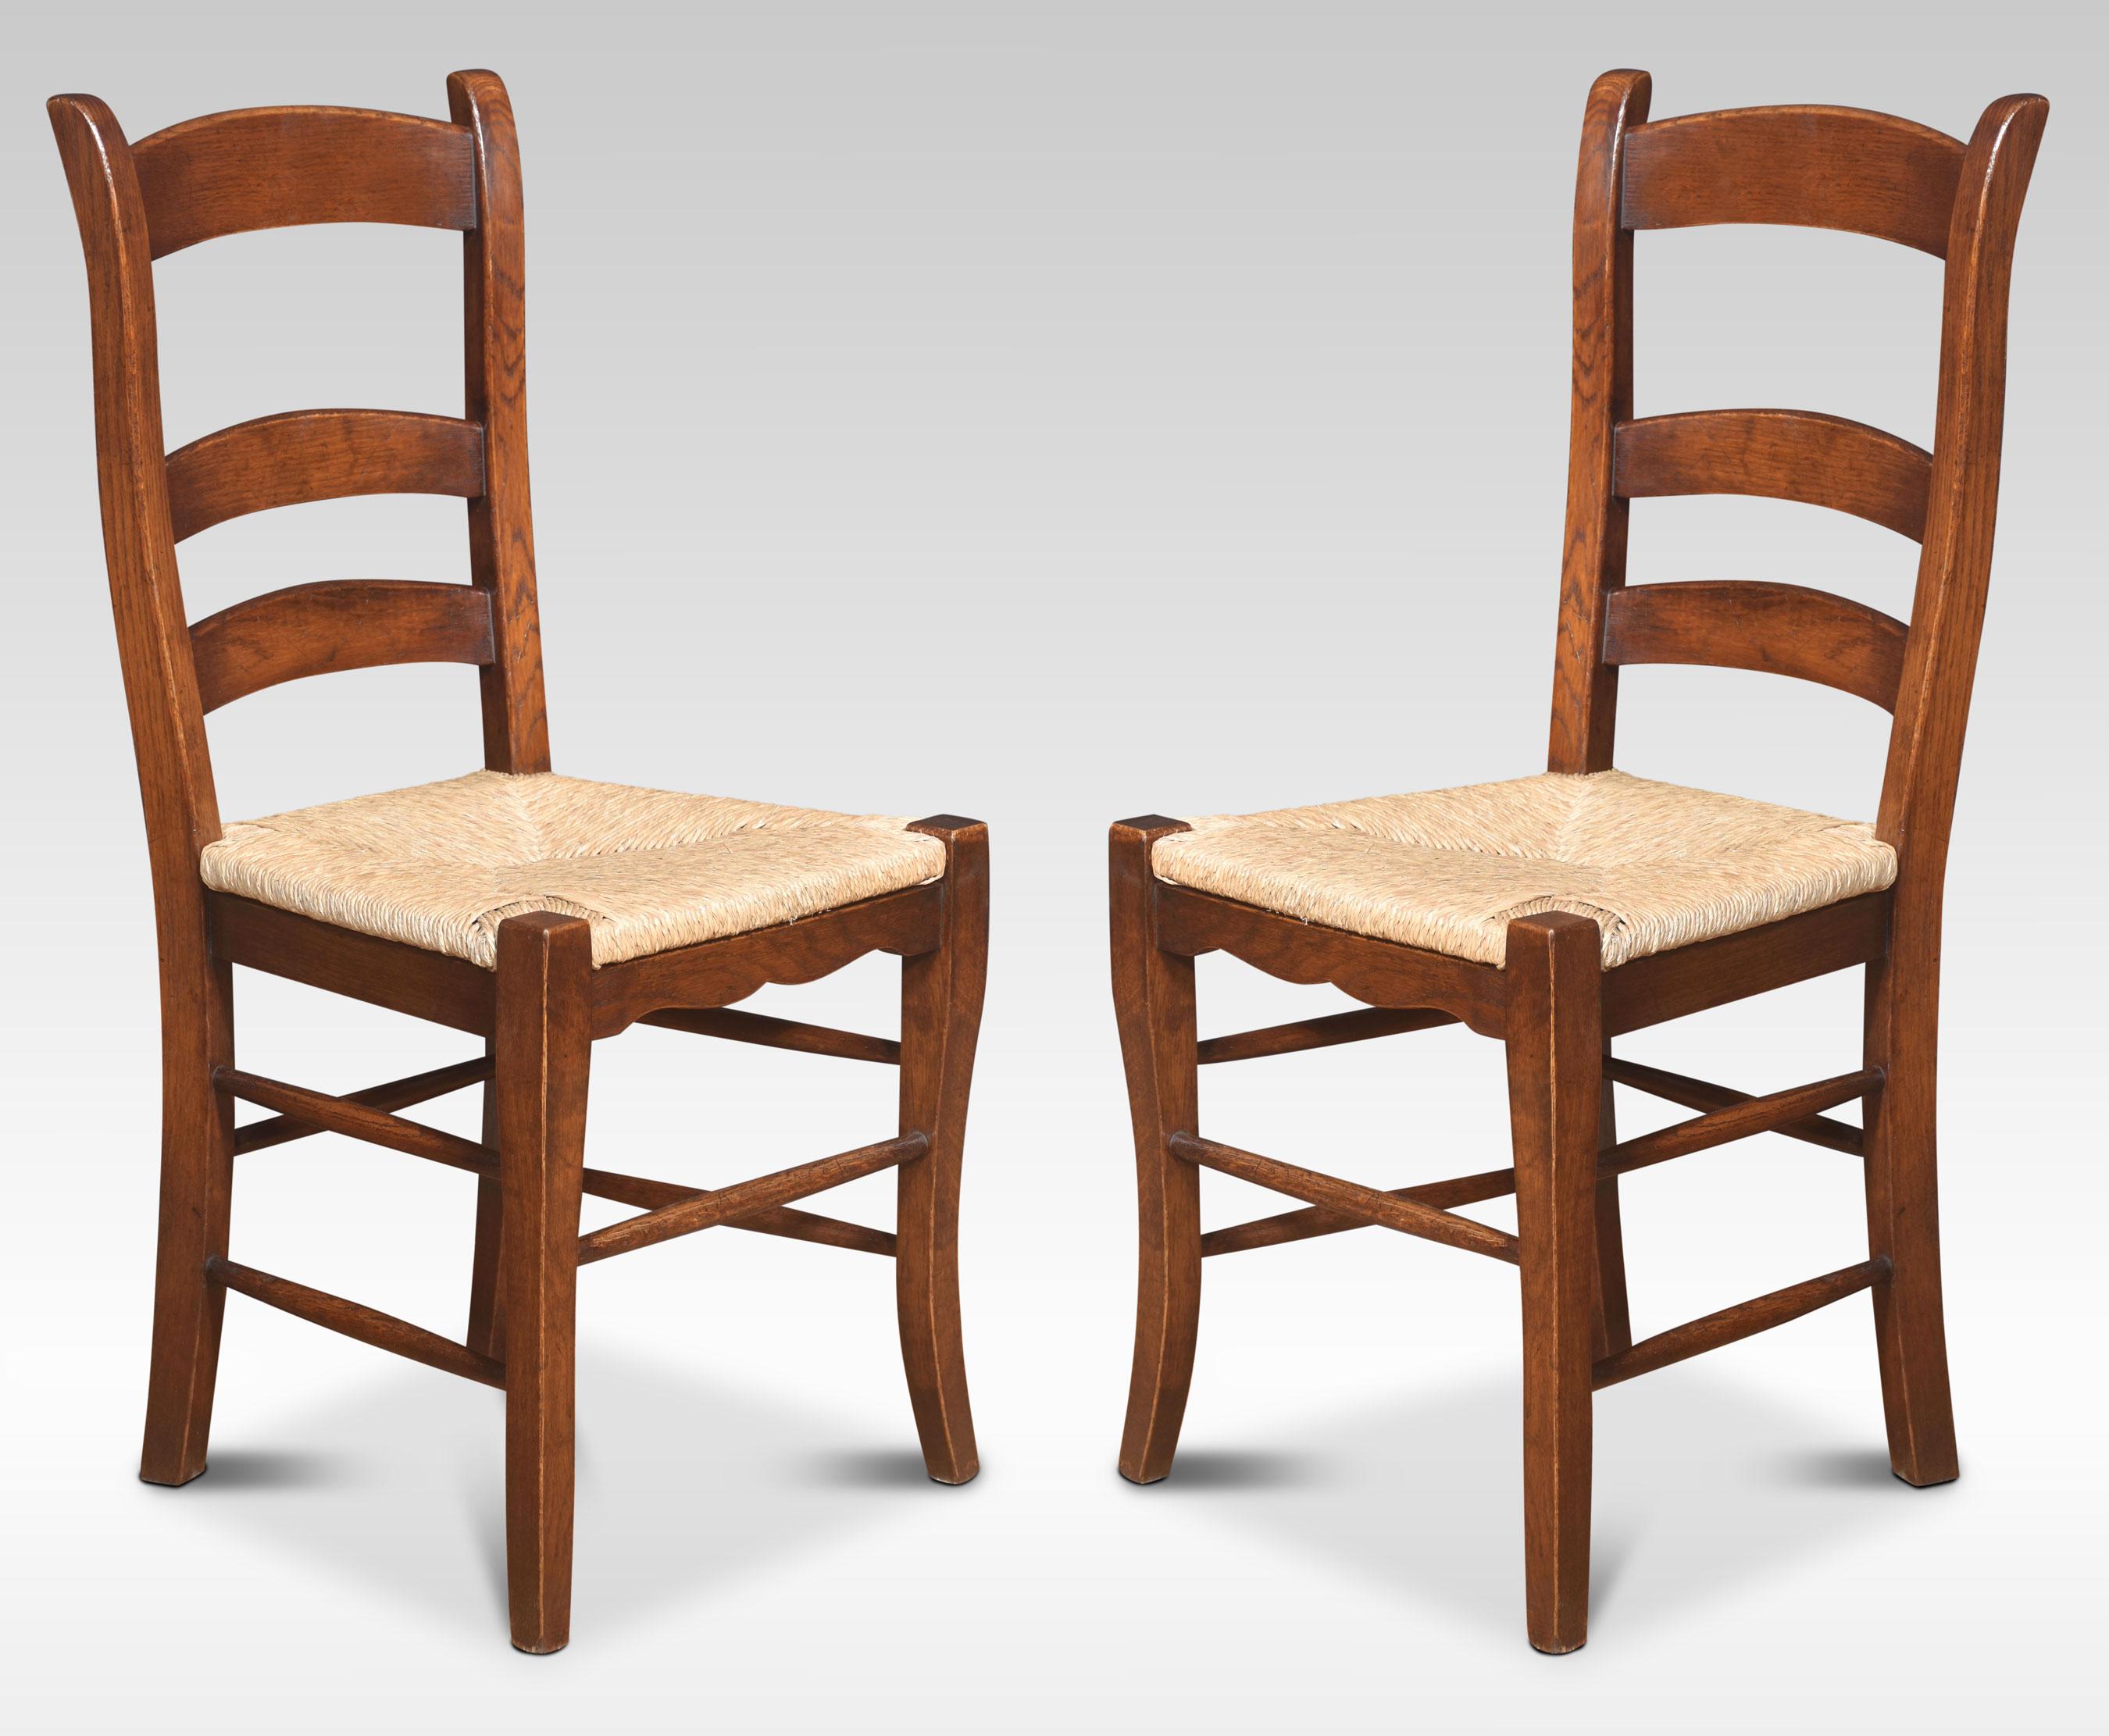 A set of eight ladder-back oak dining chairs, the ladder backs with rush seats on turned front legs united by stretchers.
Dimensions
Dimensions
Height 37 Inches height to seat 18 Inches
Width 18 Inches
Depth 17.5 Inches